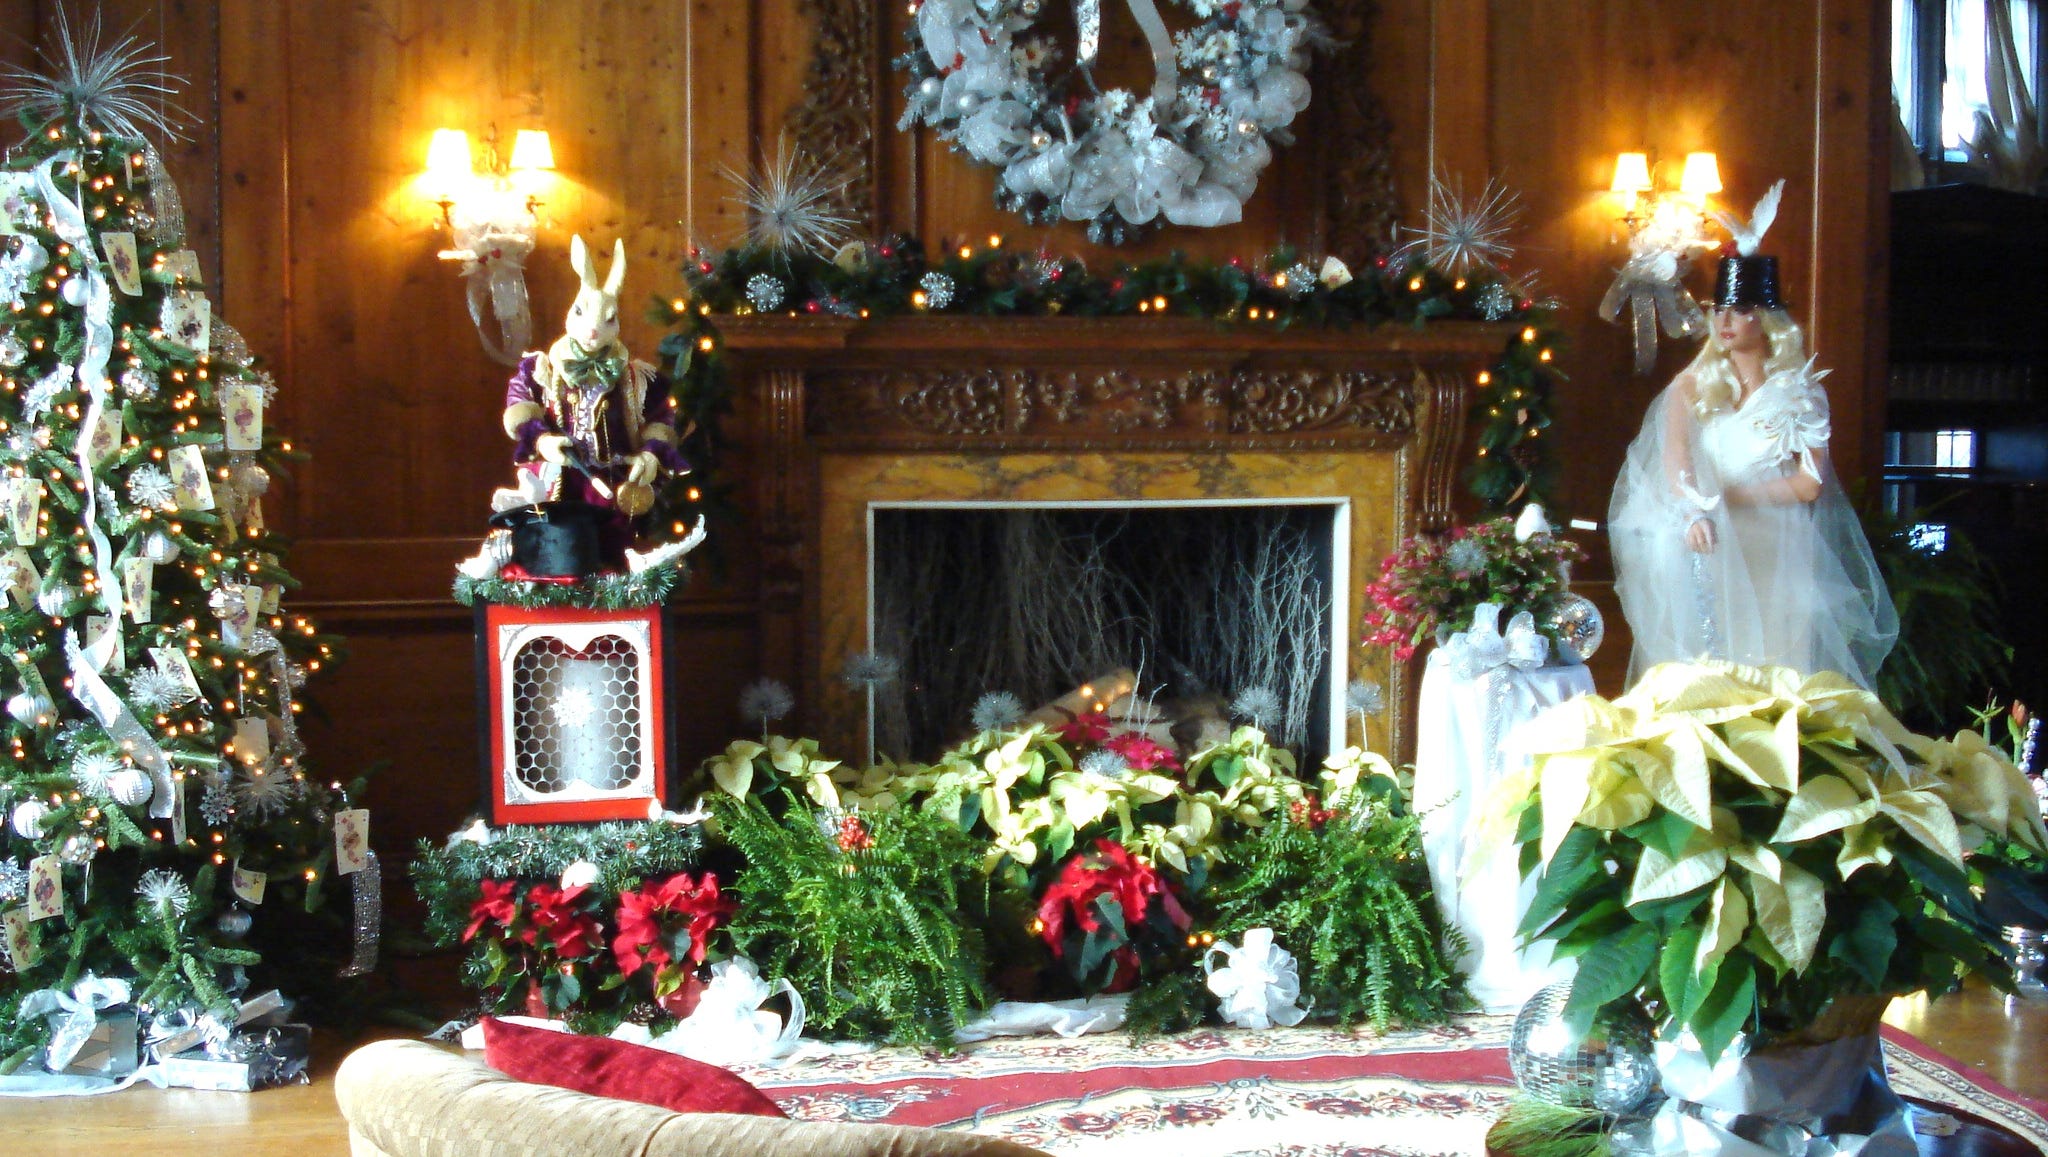 Skylands Manor in Ringwood shows off holiday decorations with tours